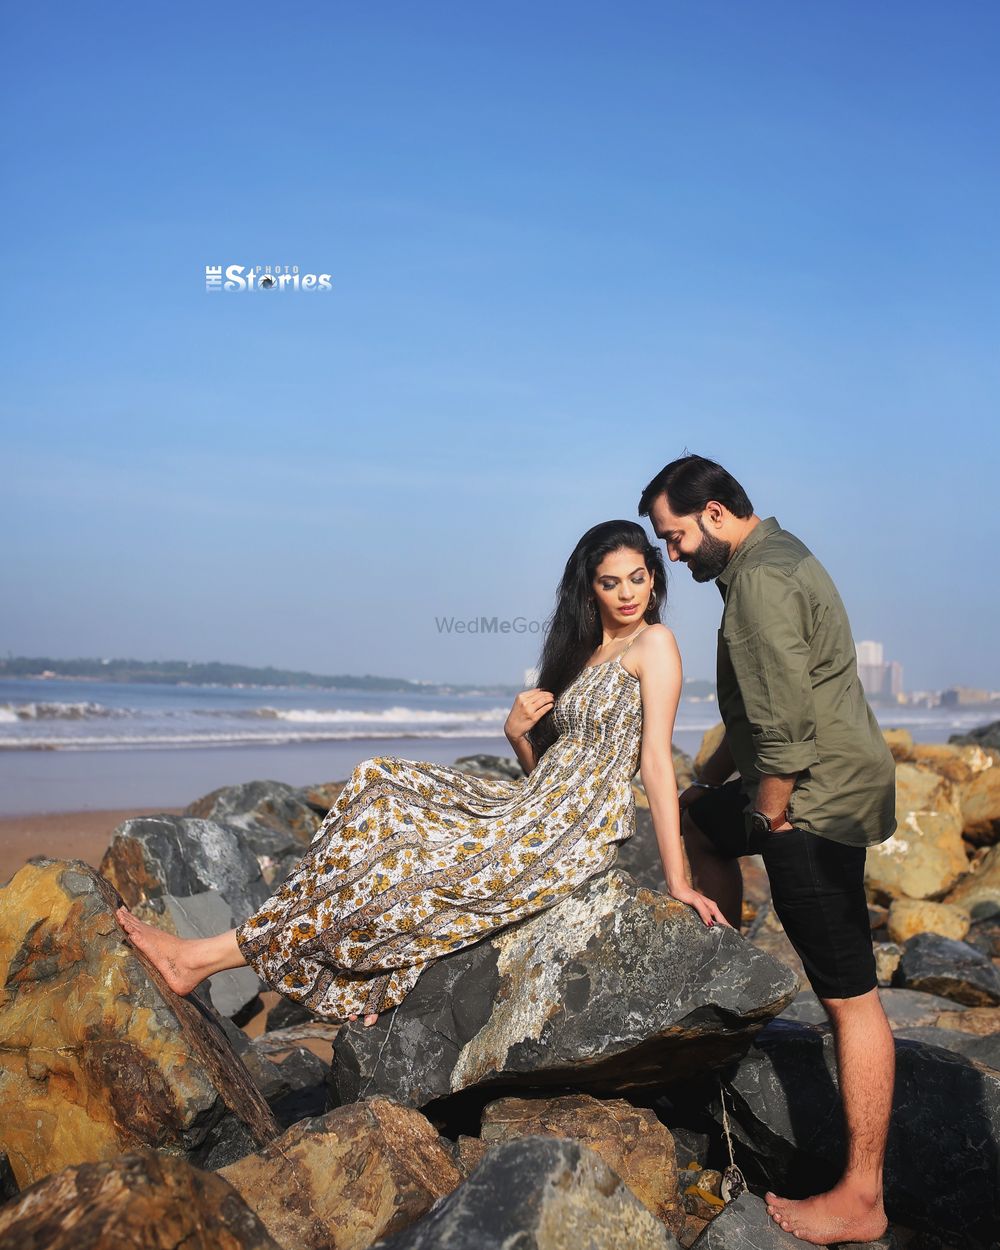 Photo From Pre Wedding Shoot | Monish & Ankita | Romantic & Candid portraits - By The Photo Stories